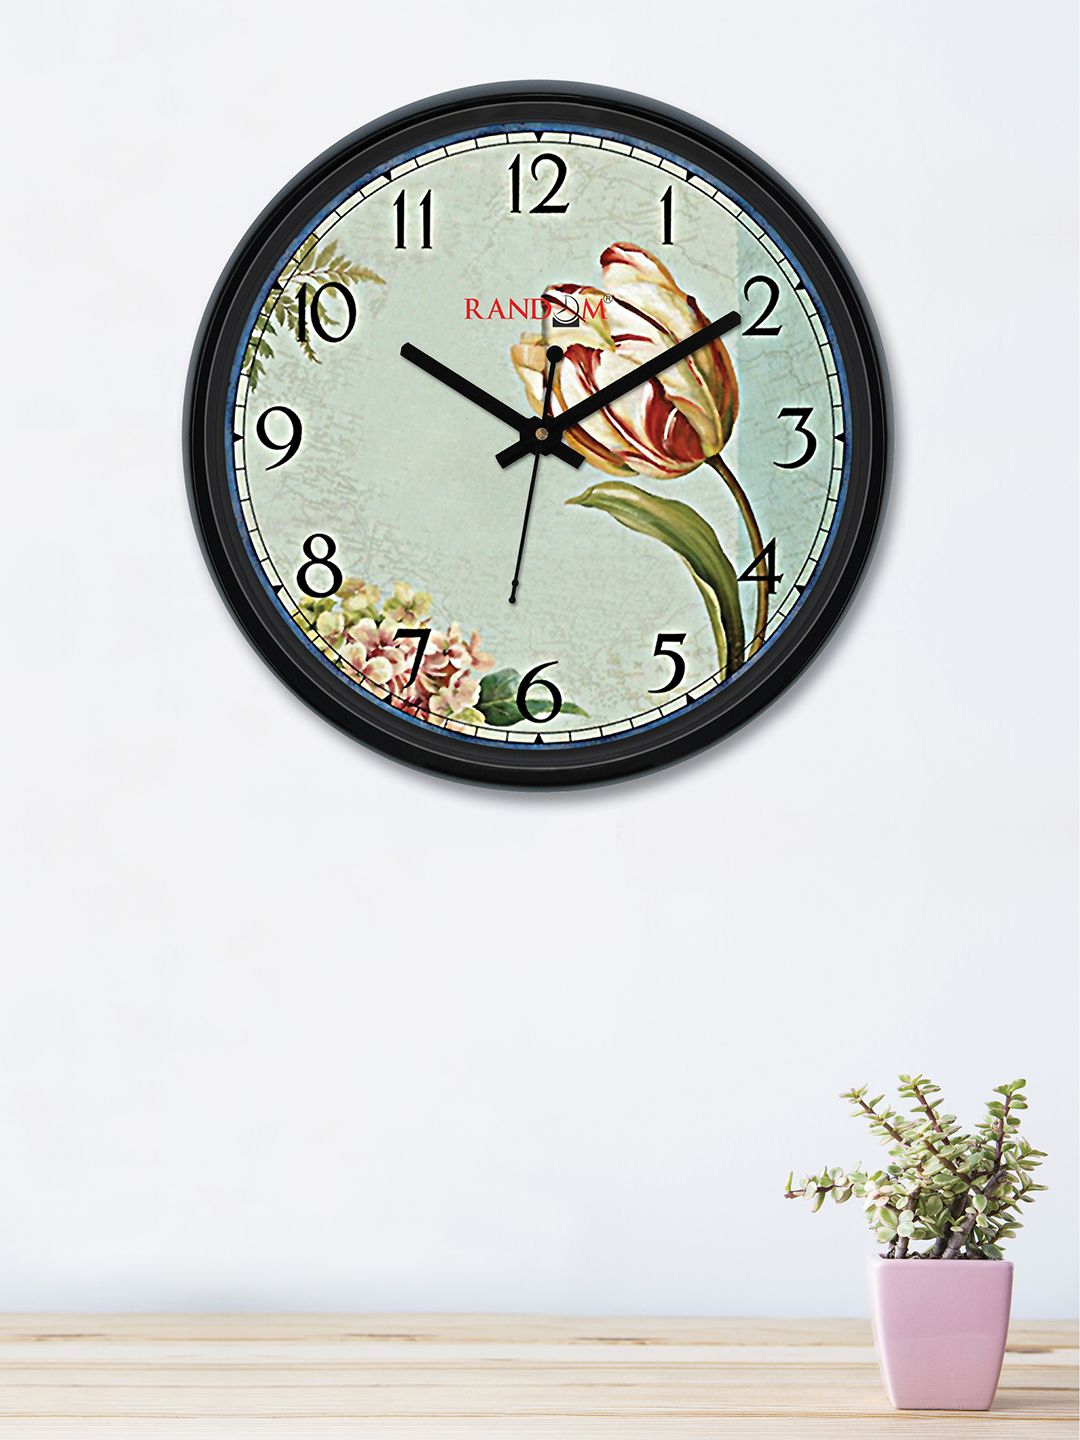 RANDOM Sea Green & Red Round Printed 30 cm Analogue Wall Clock Price in India